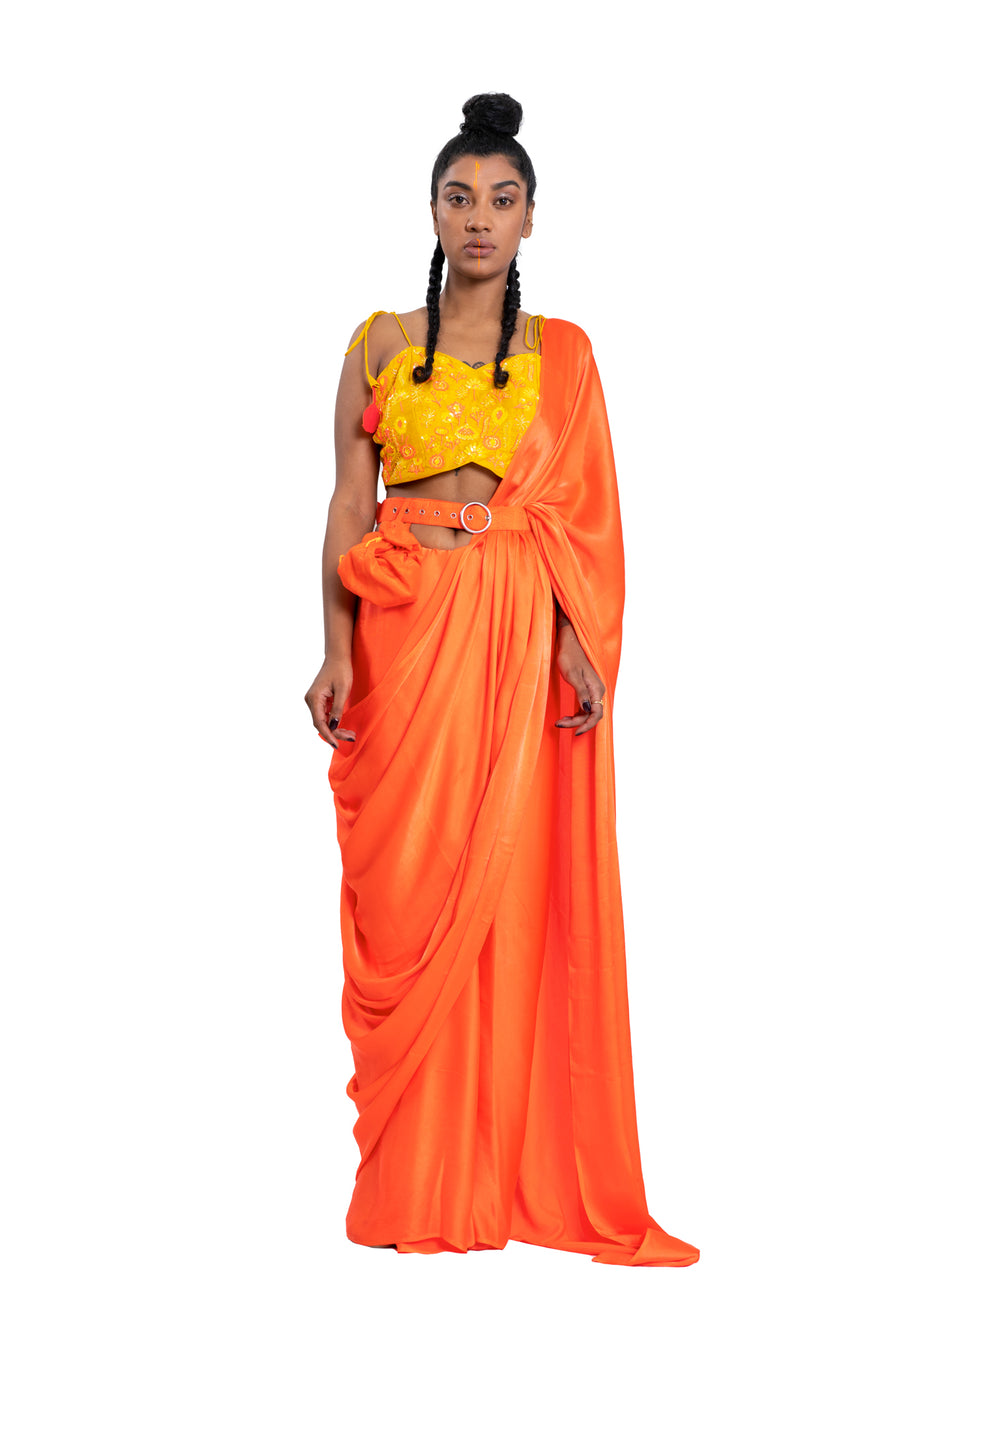 Pure Satin Neon Orange Saree Styled With Neon Embroidered Sequin Blouse.